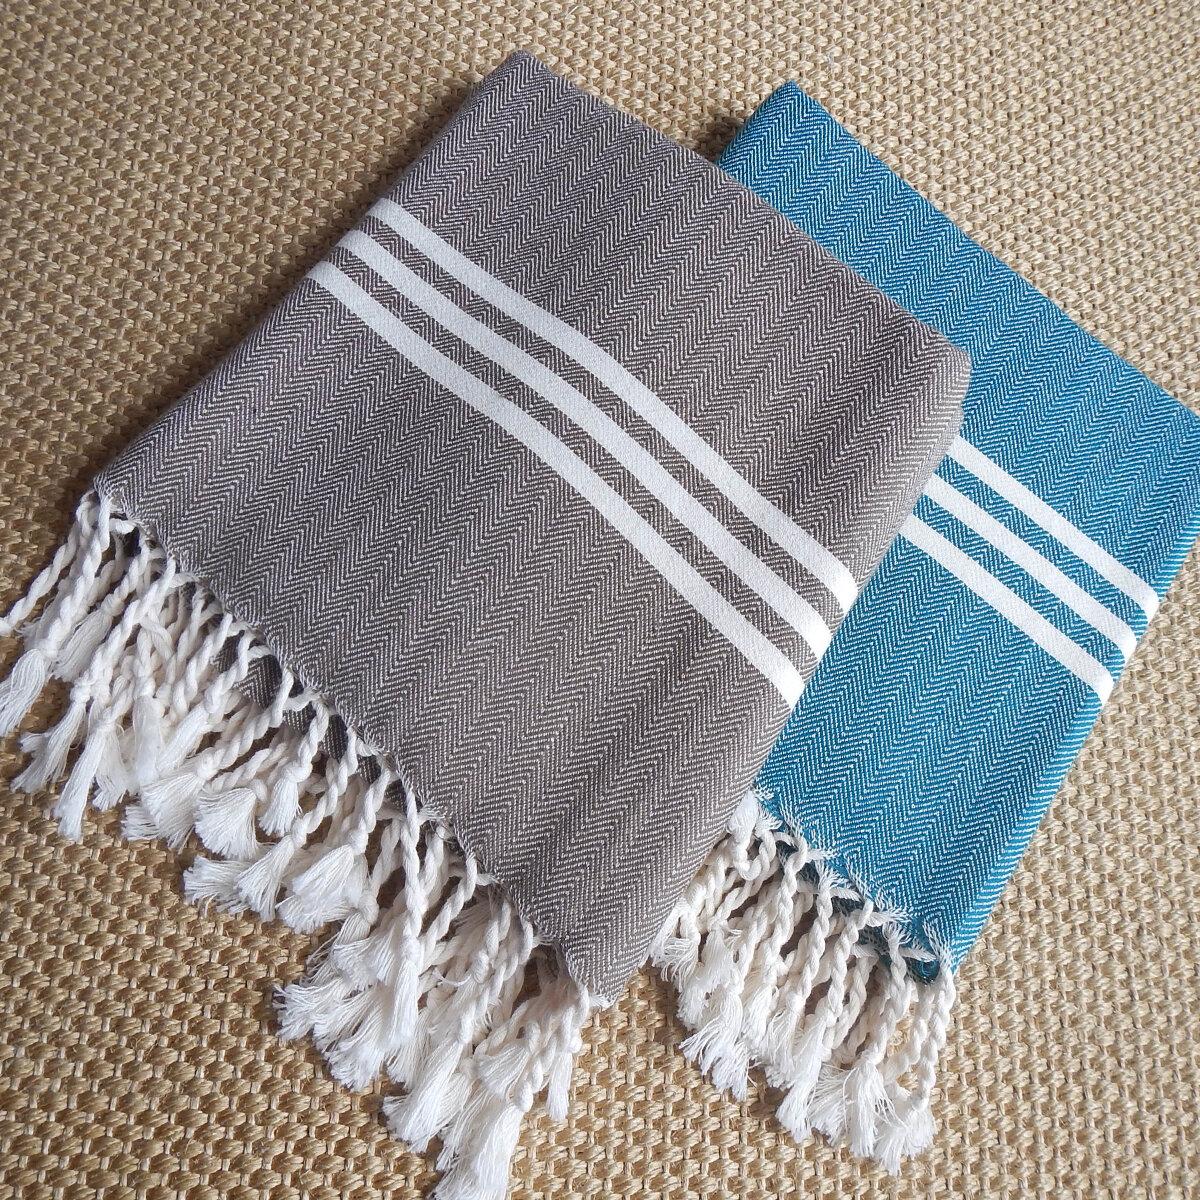 What is a Turkish Pestemal towel?